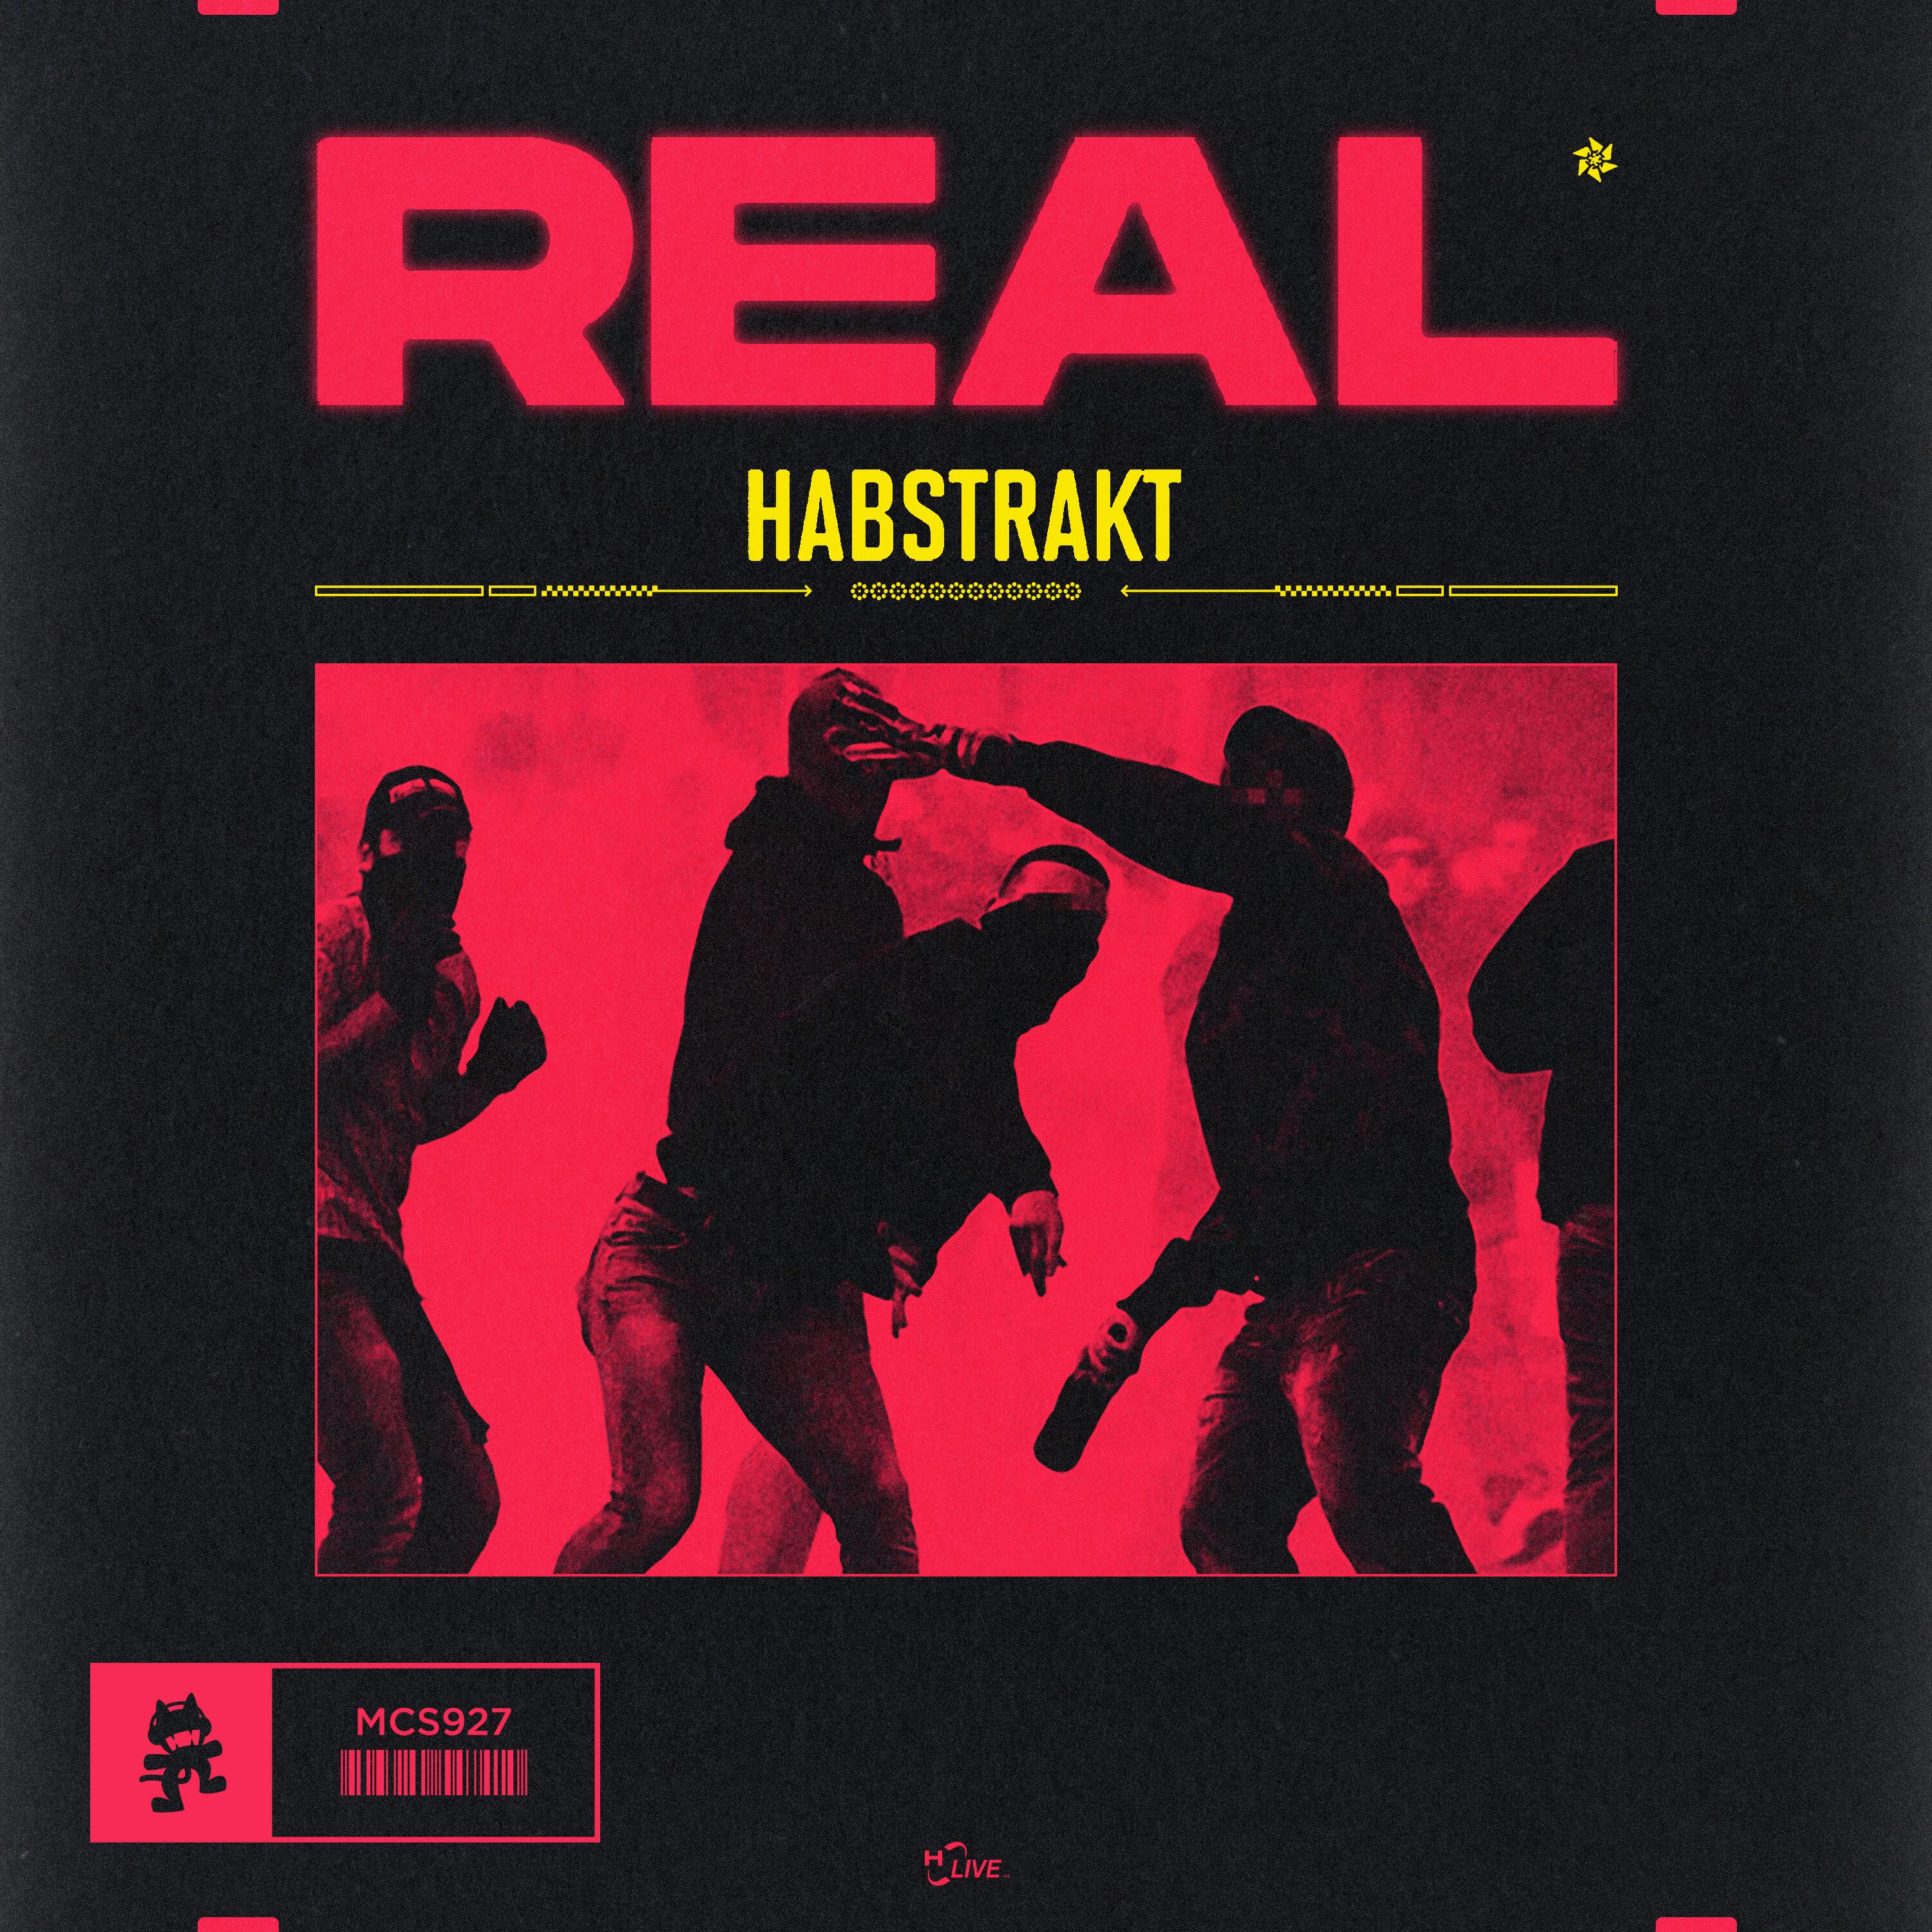 Habstrakt is Ending 2019 with a Bang on Latest Single “REAL”